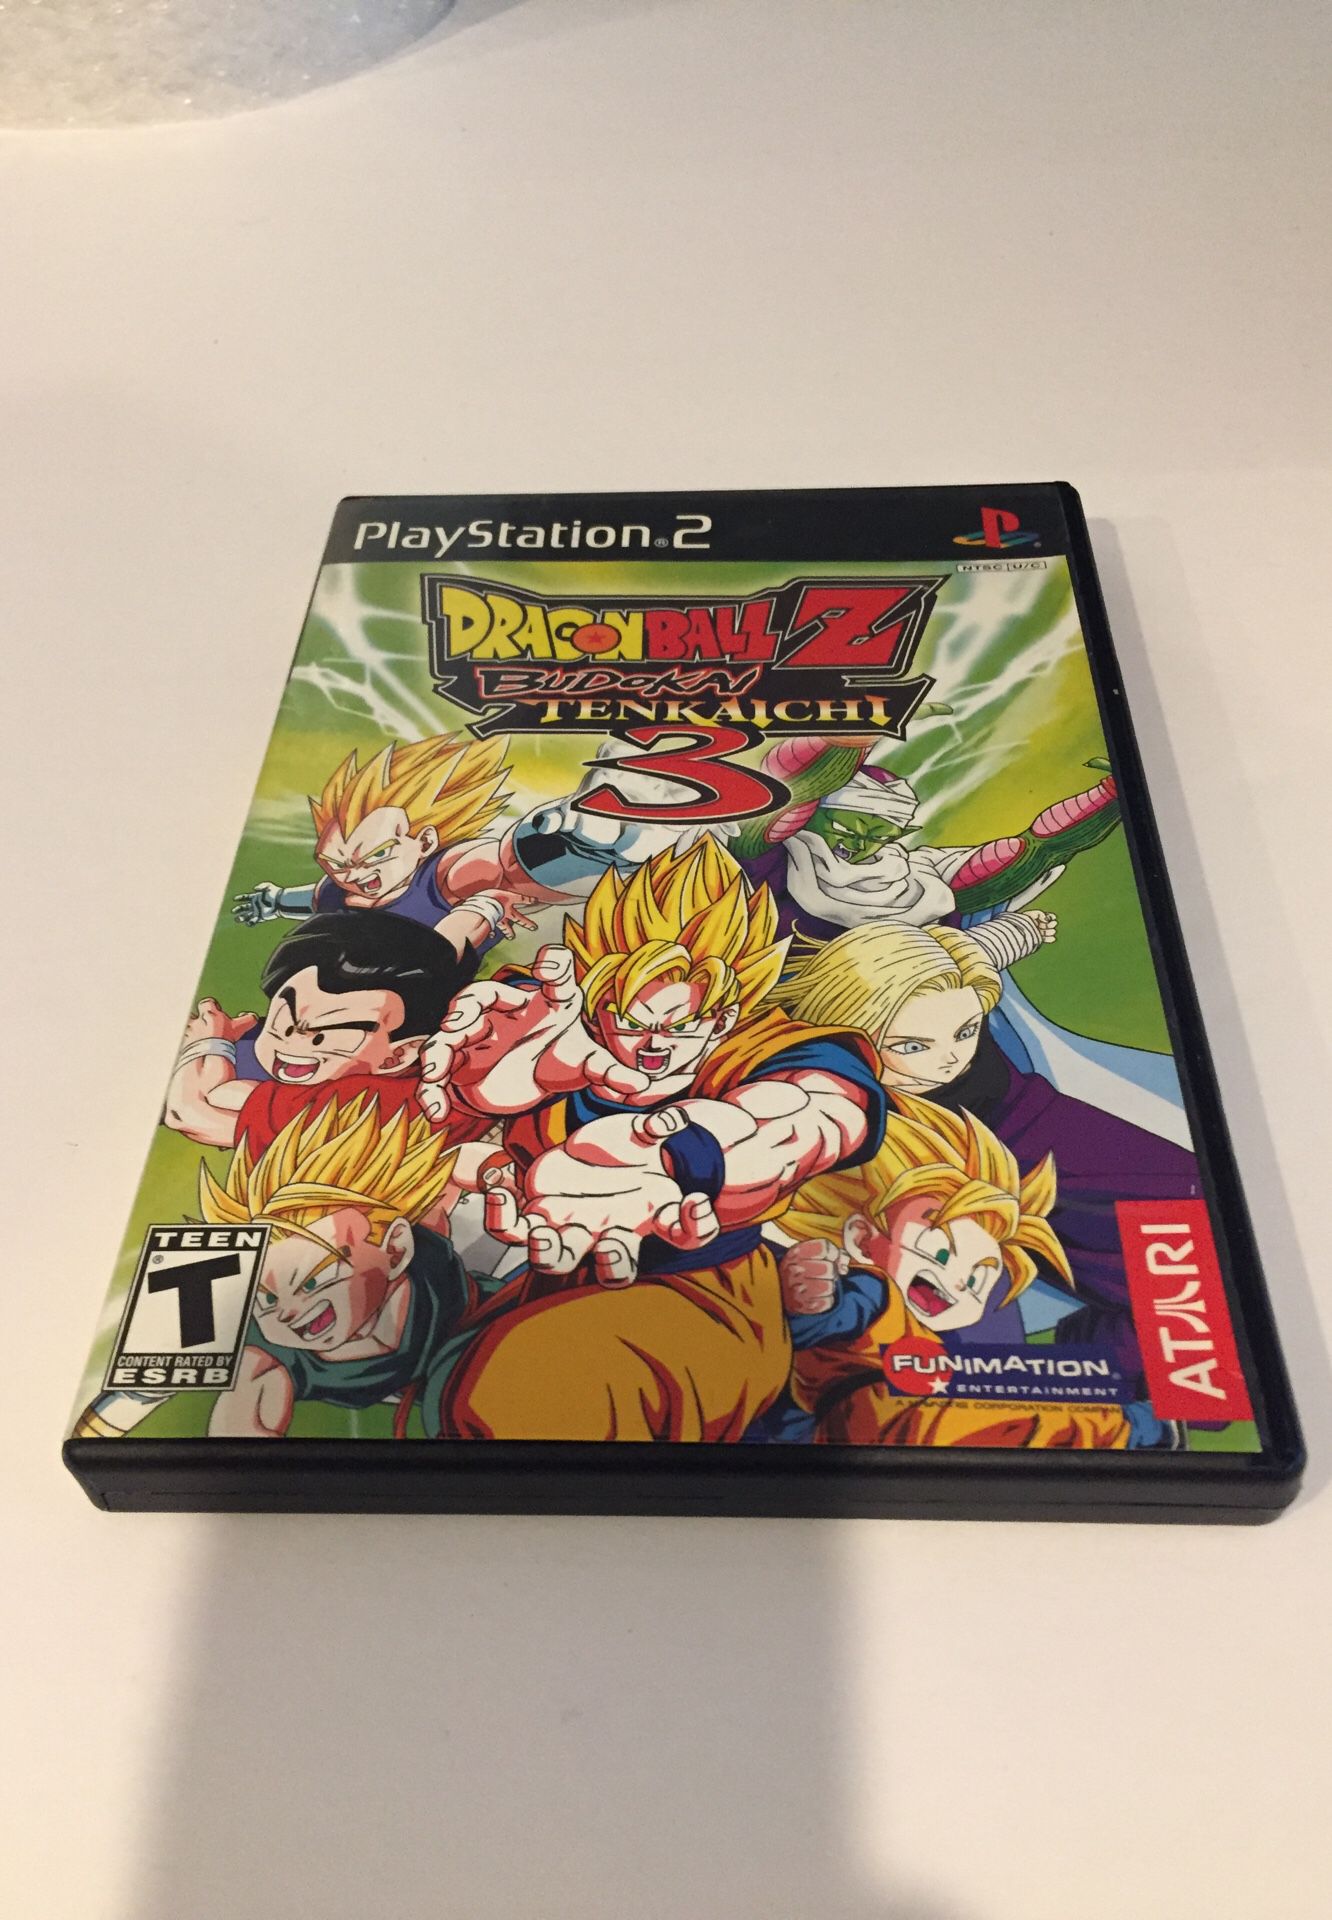 Dragonball Z Budokai Tenkaichi 3 PS2 playstation 2 for Sale in Highland  Park, IL - OfferUp